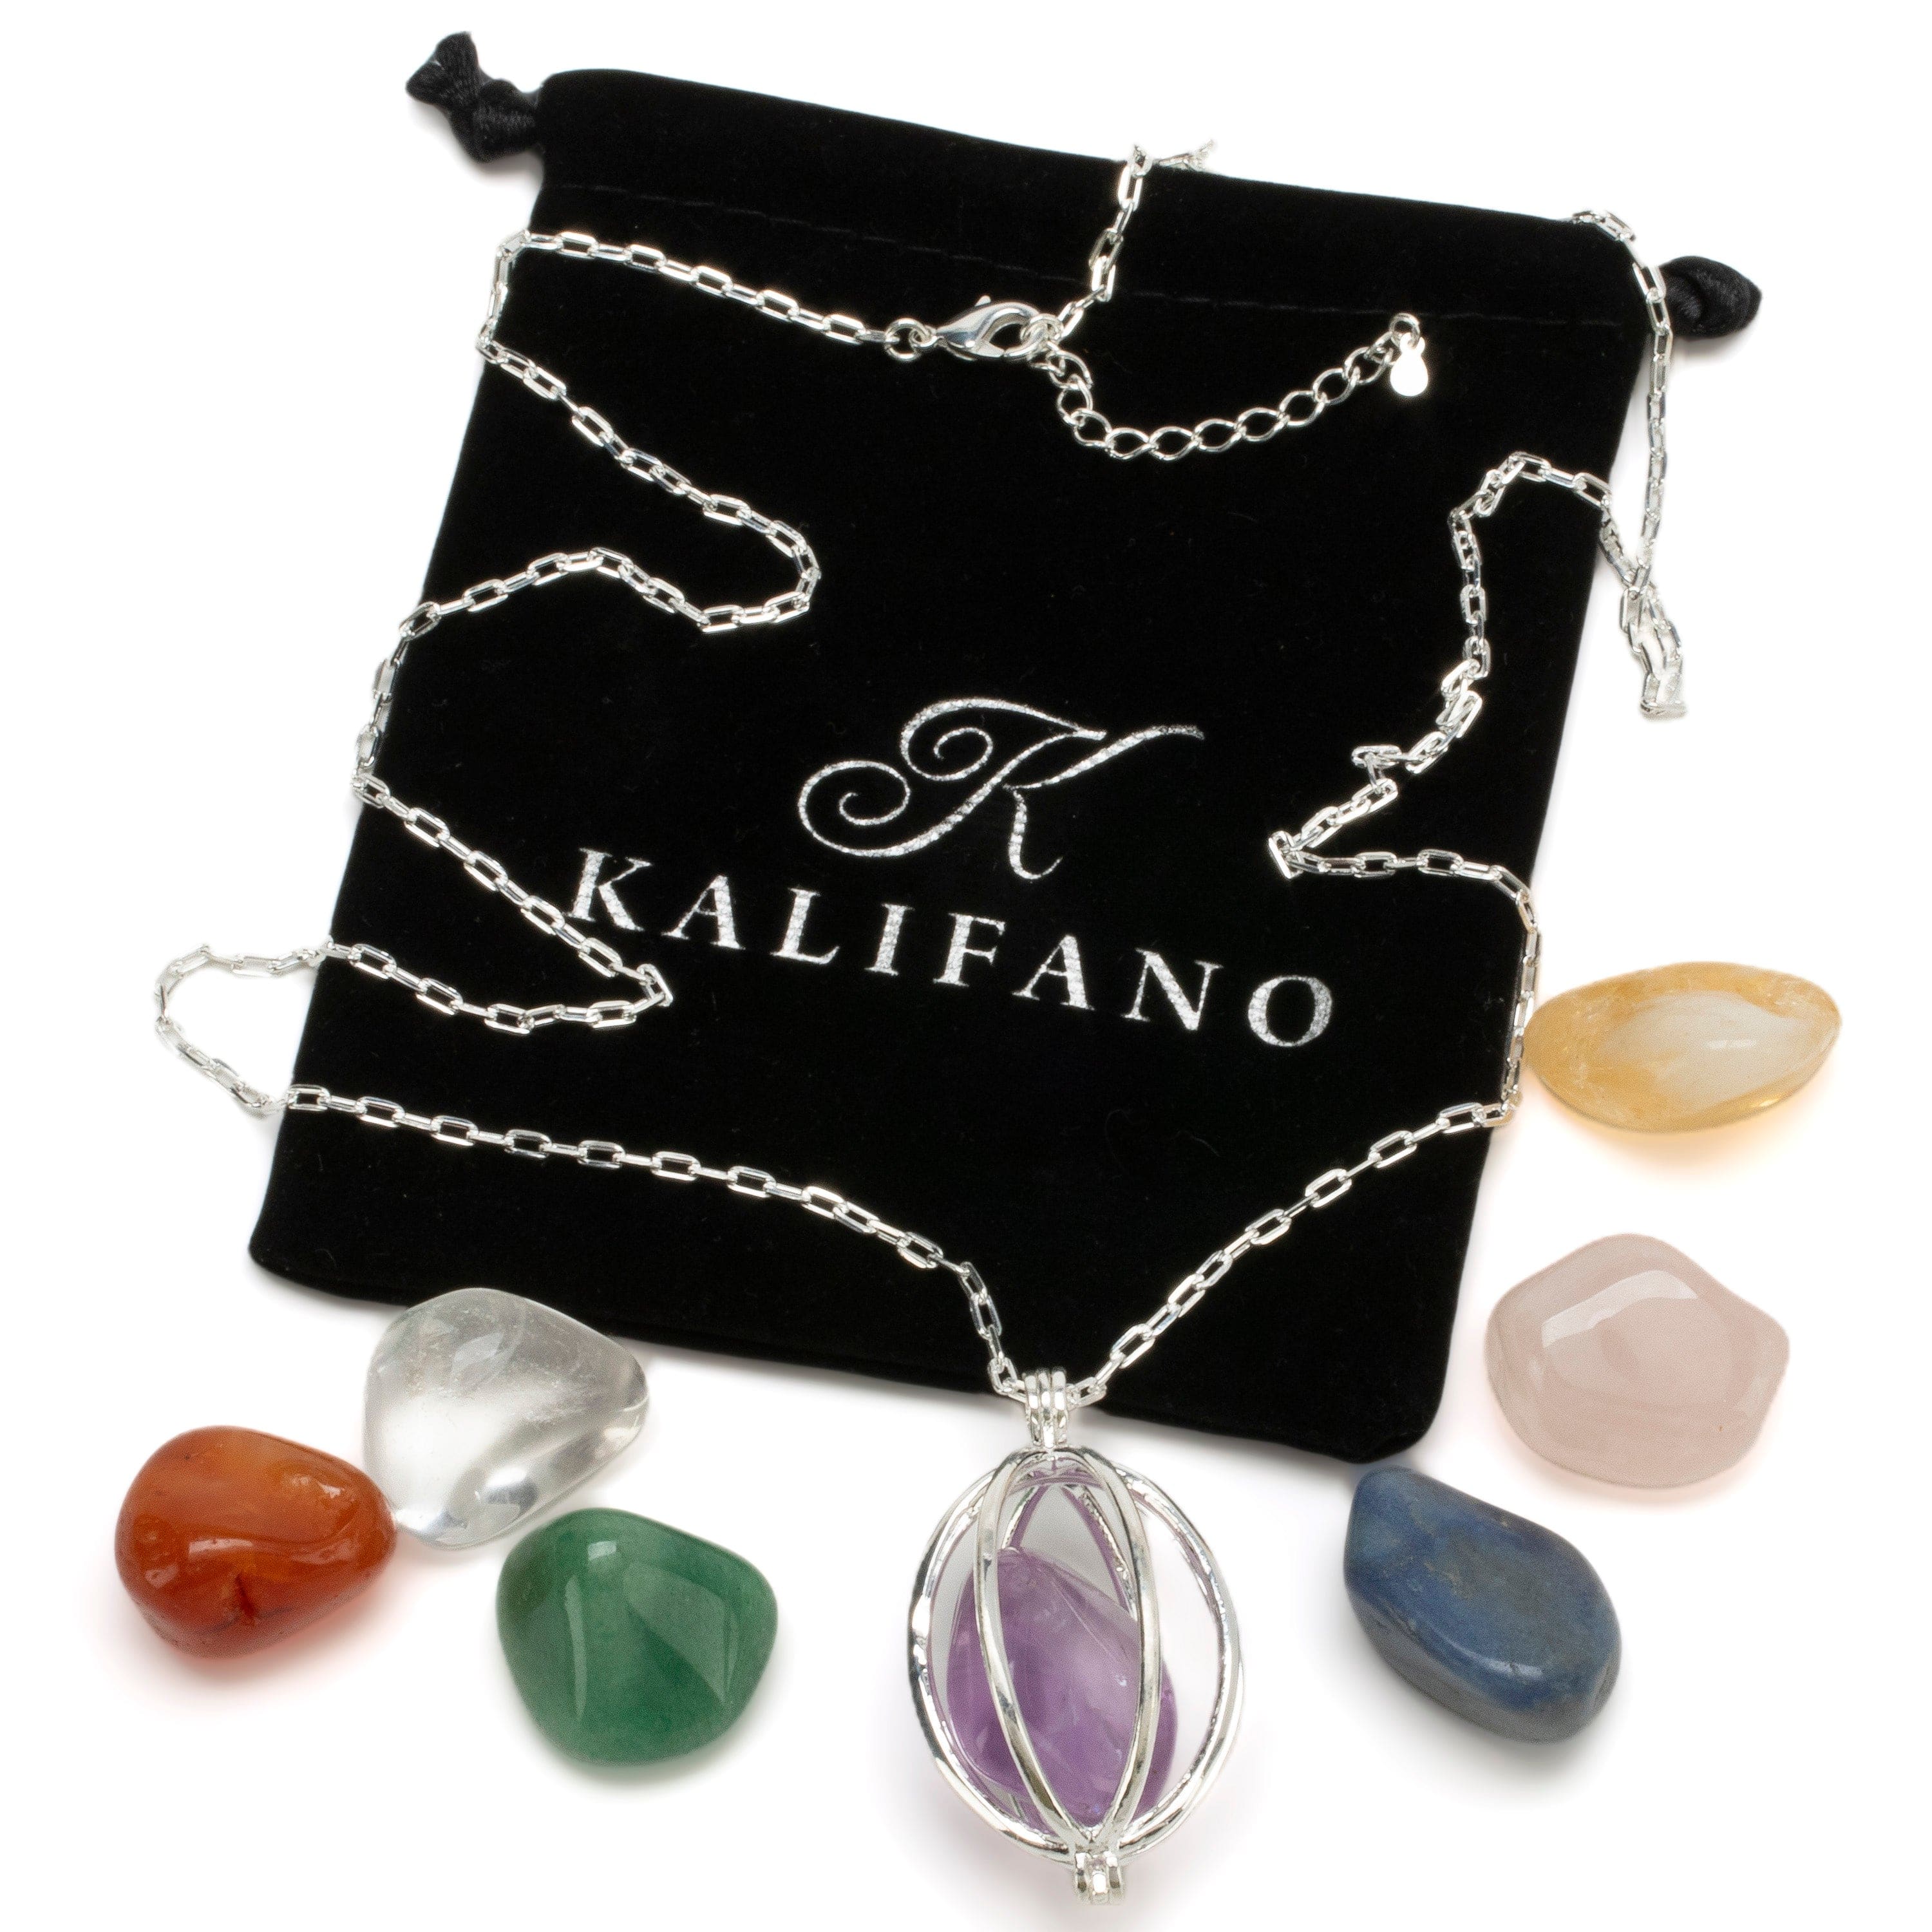 Kalifano Crystal Jewelry Silver Toned Convertible Chakra Pendant with Replaceable Tumbled Stones CJN-2057S-MT